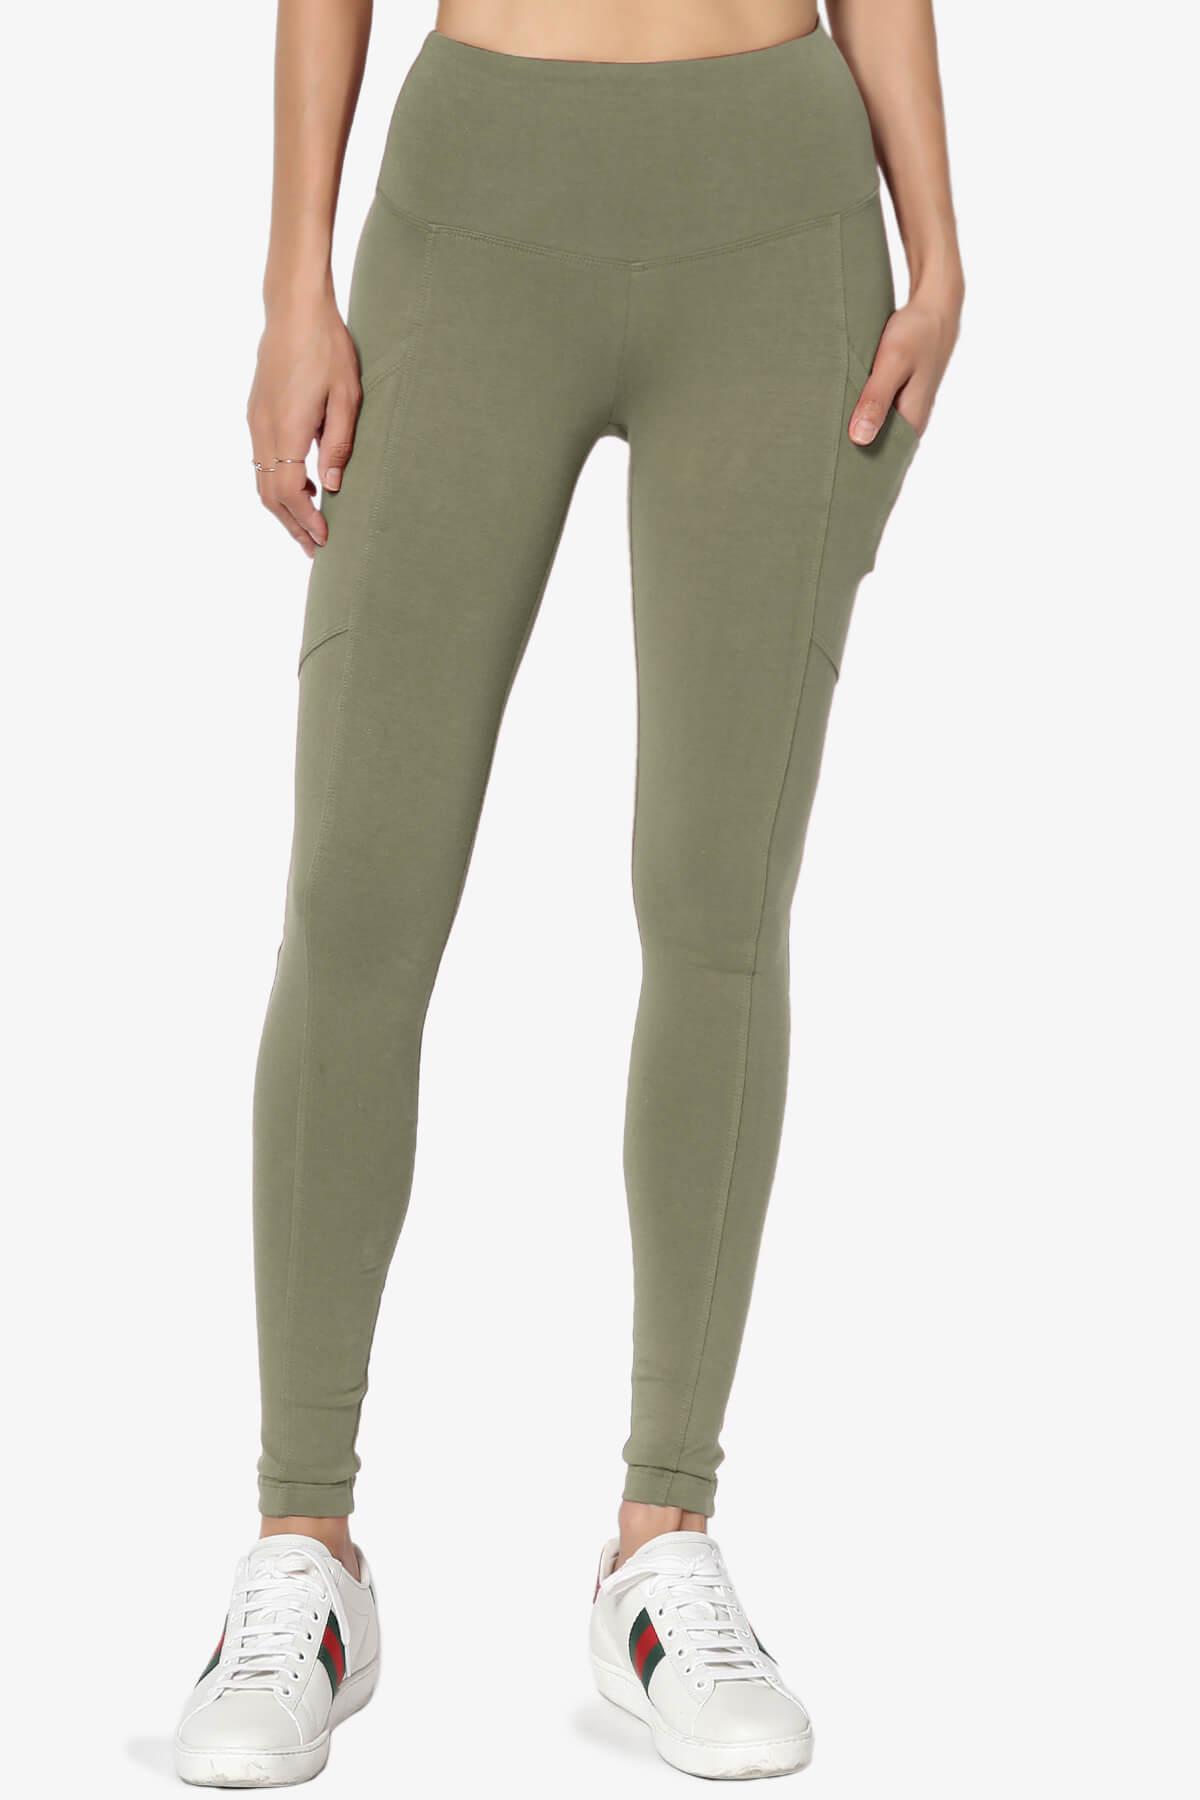 Ansley Luxe Cotton Leggings with Pockets DUSTY OLIVE_3